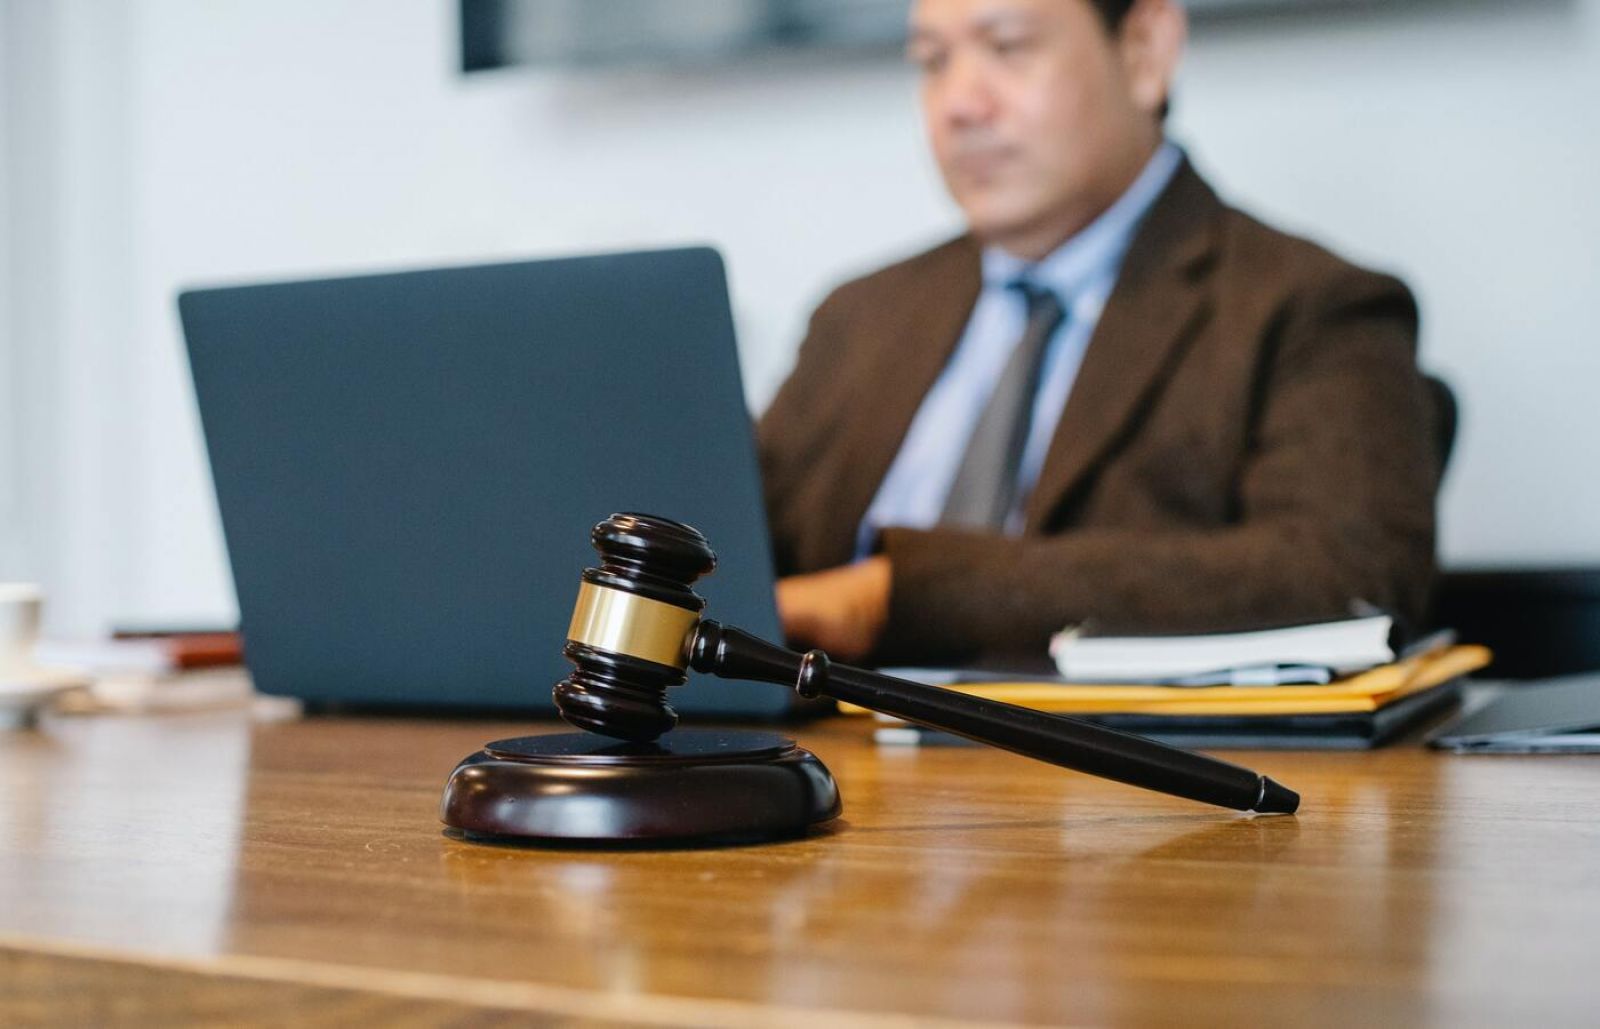 Image: court gavel and man on a laptop banner image